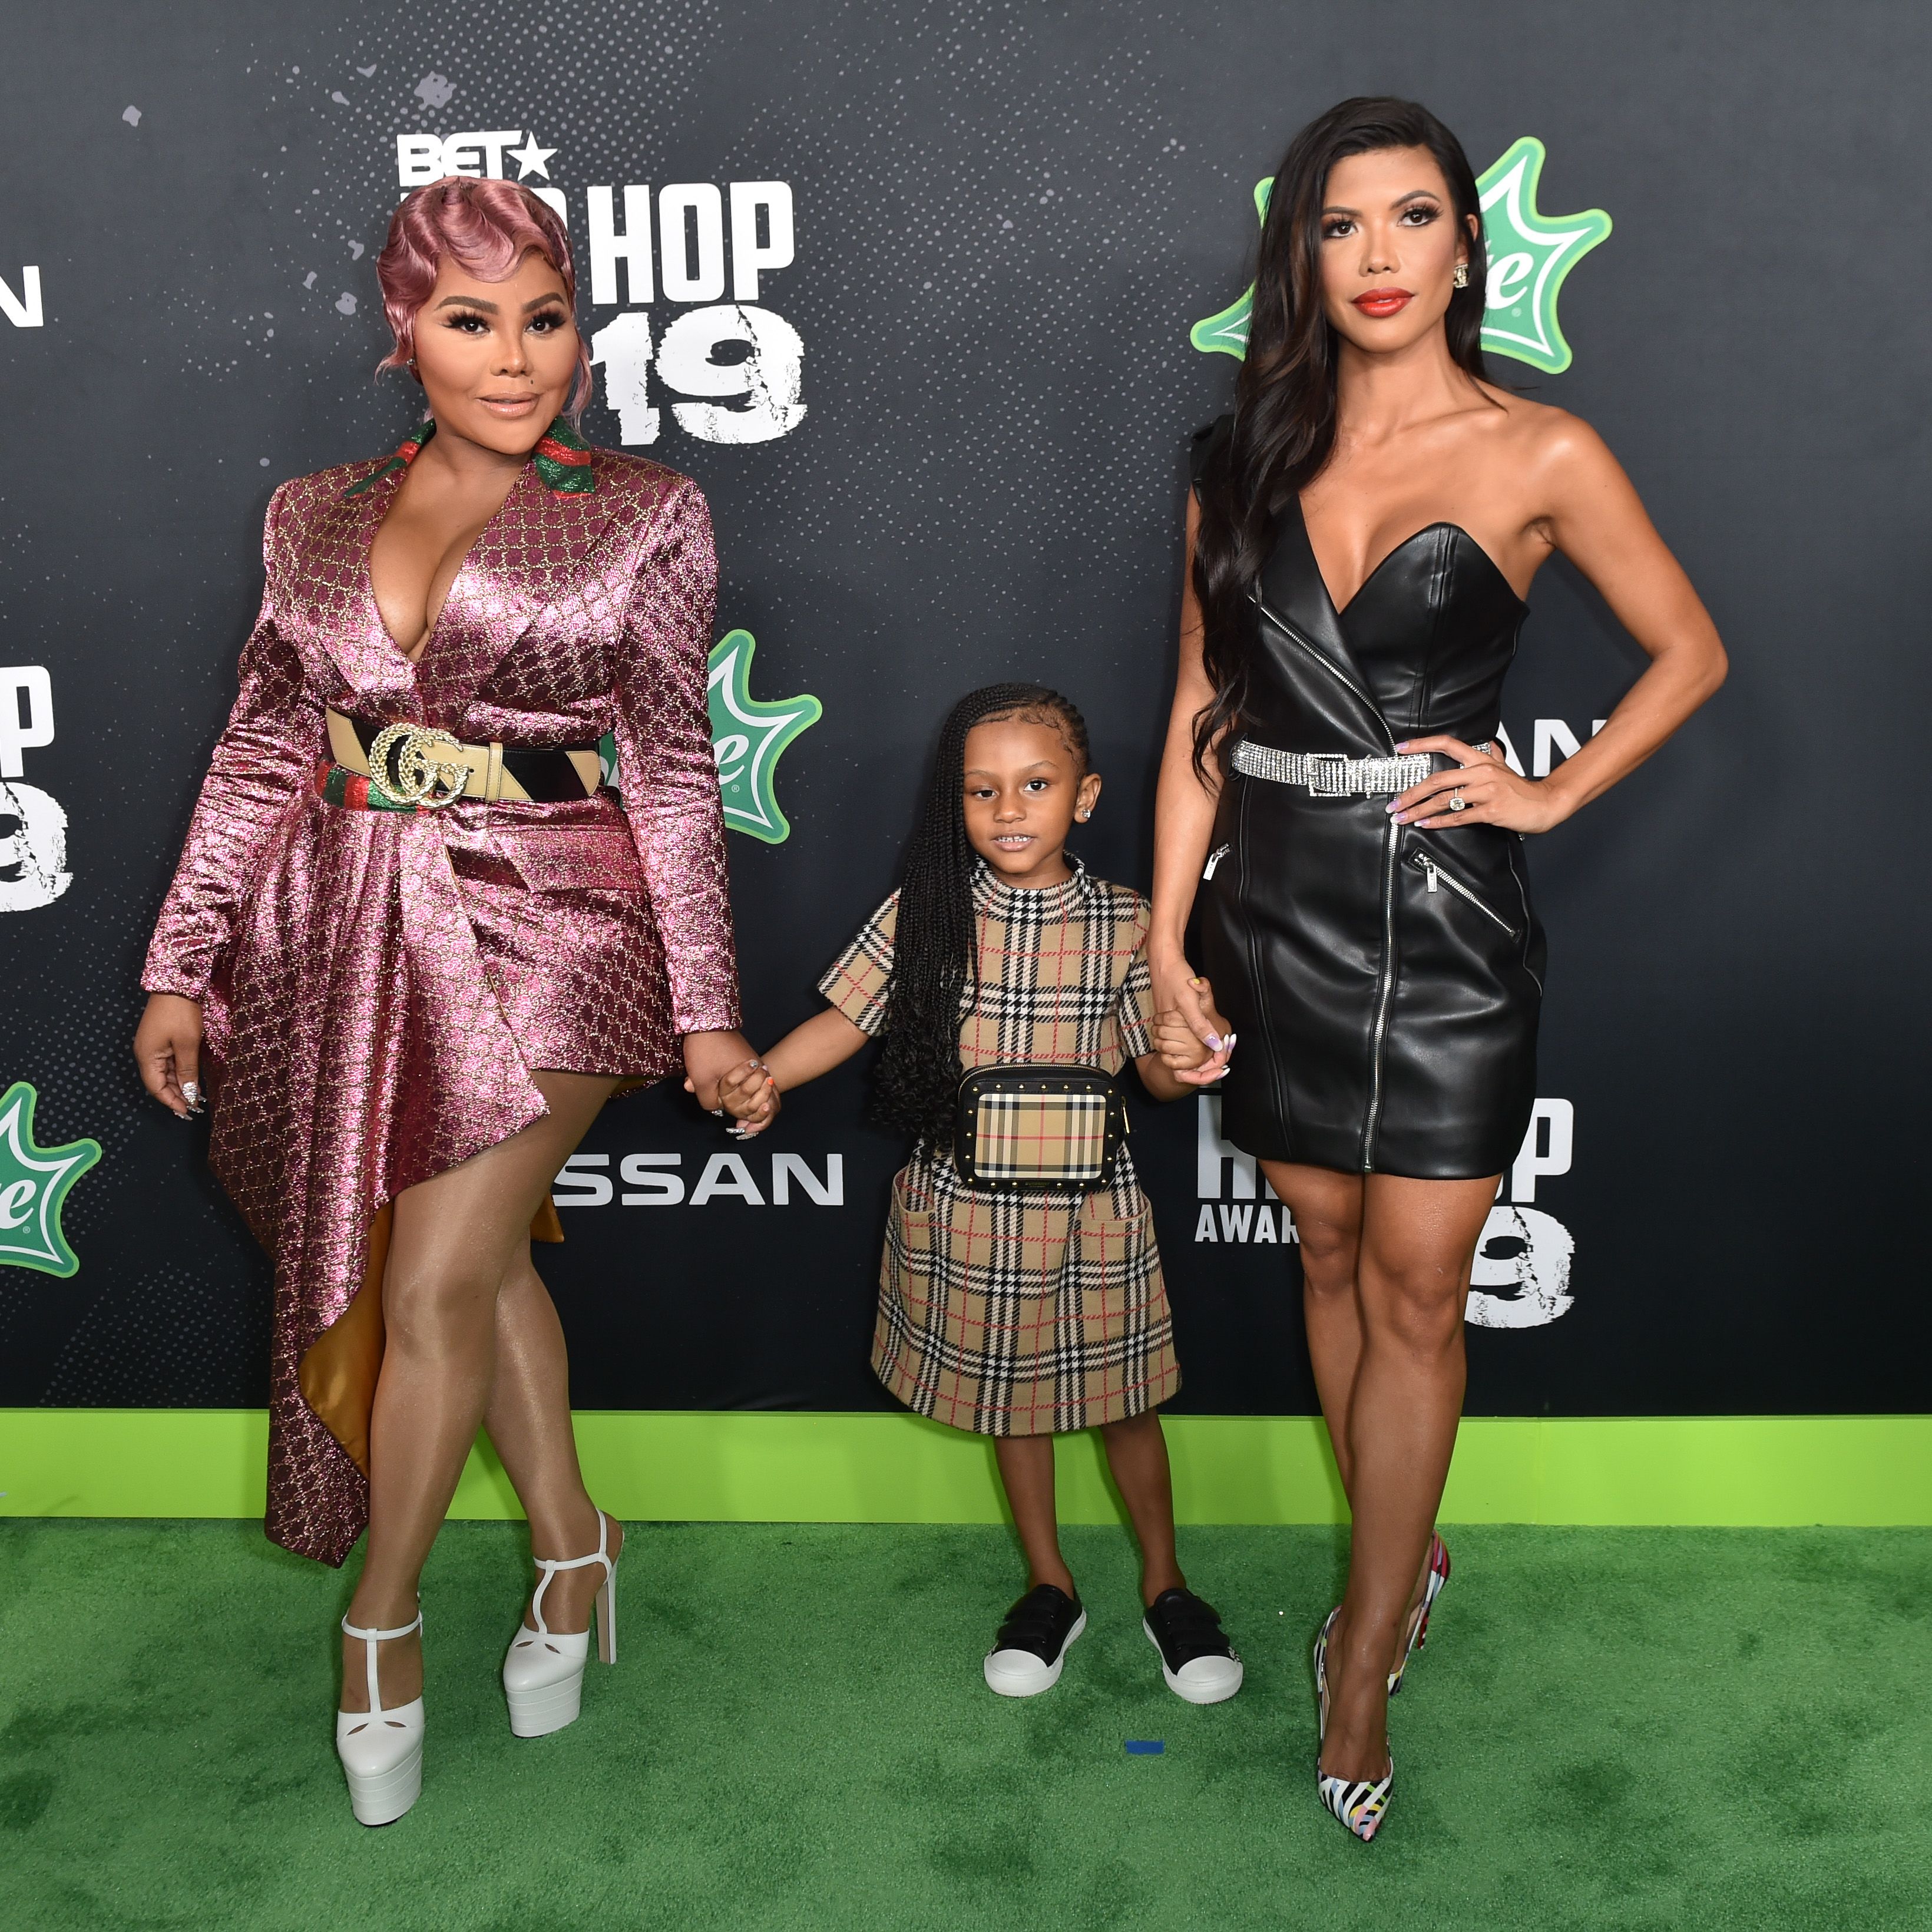 Lil' Kim, Royal Reign, and a guest during the 2019 BET Hip Hop Awards on October 05, 2019, in Atlanta, Georgia. | Source: Getty Images